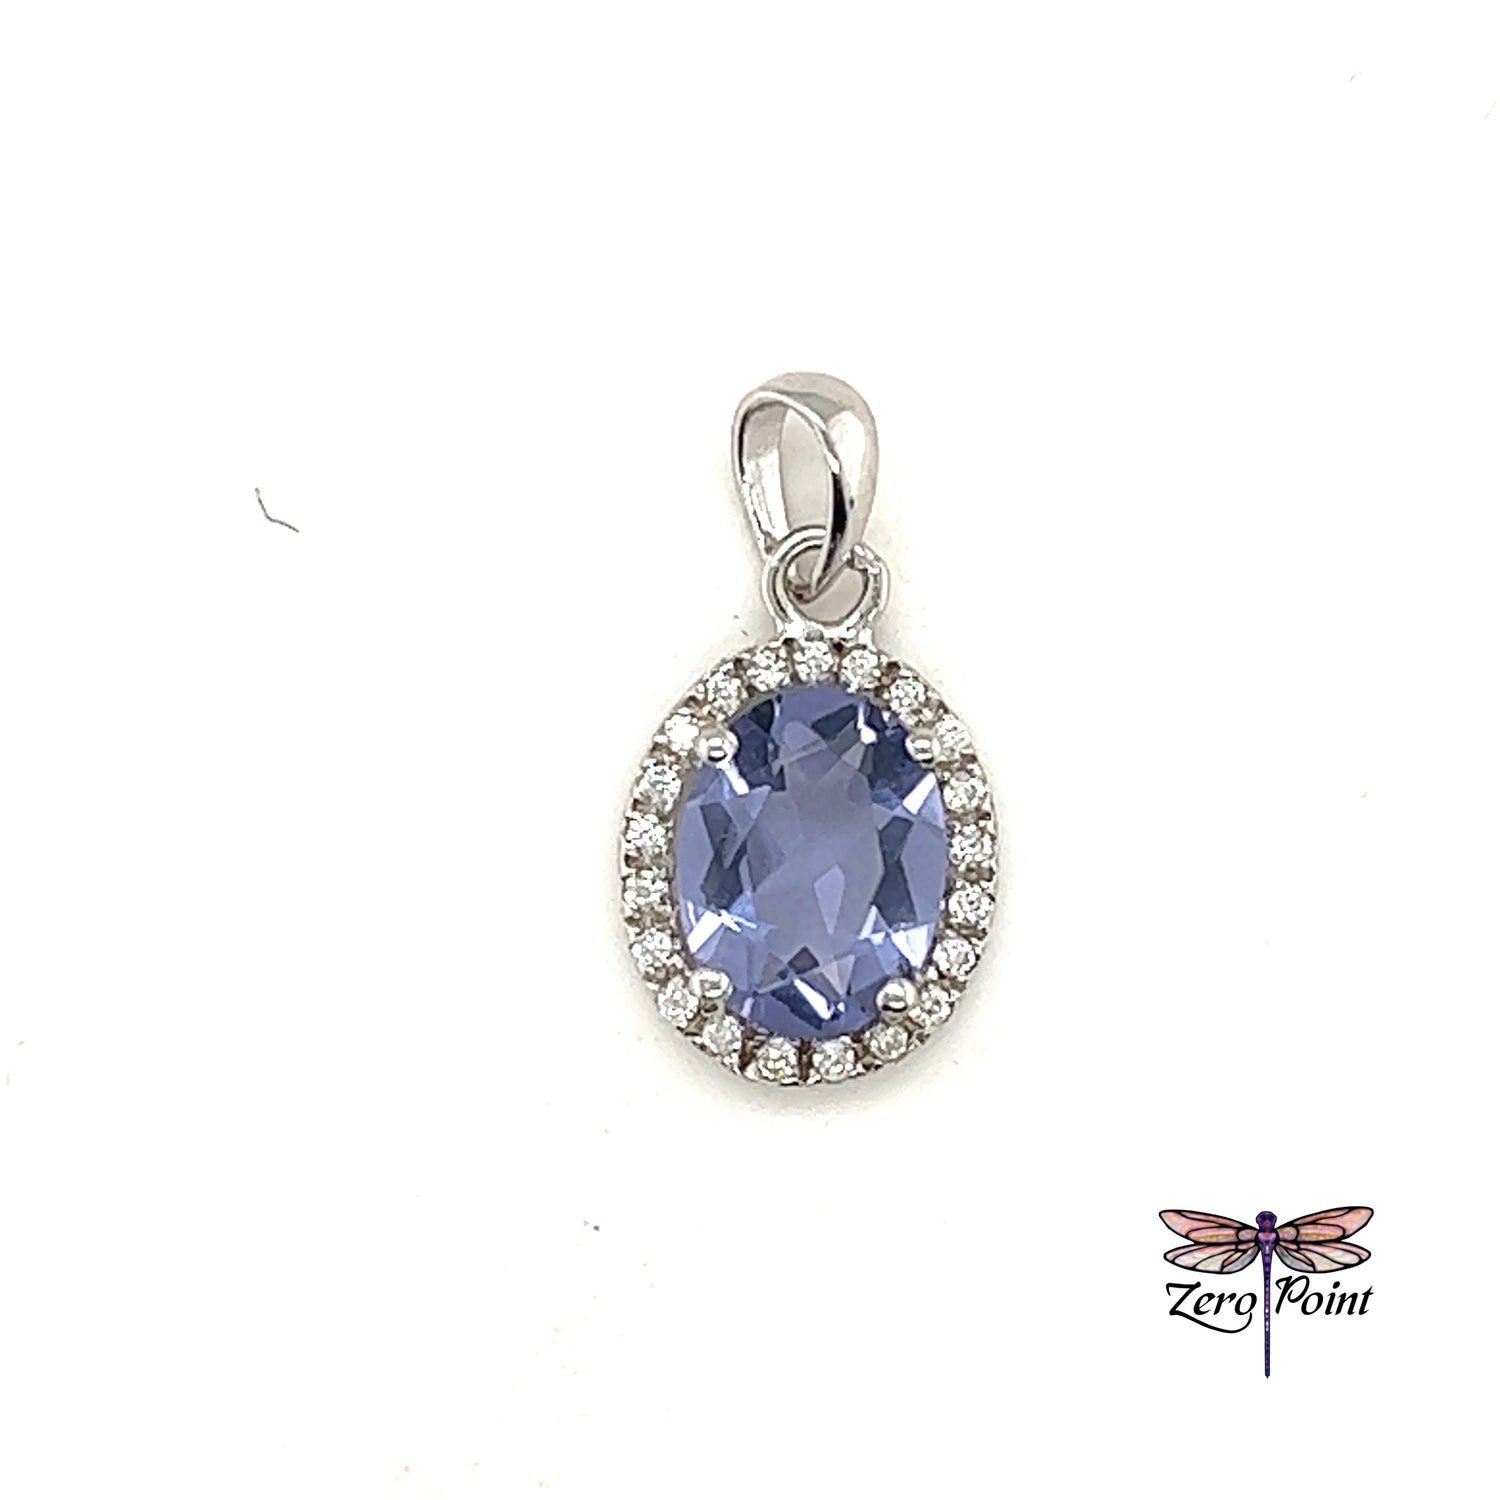 Helenite Oval Pendant 7x9mm - Zero Point Crystals